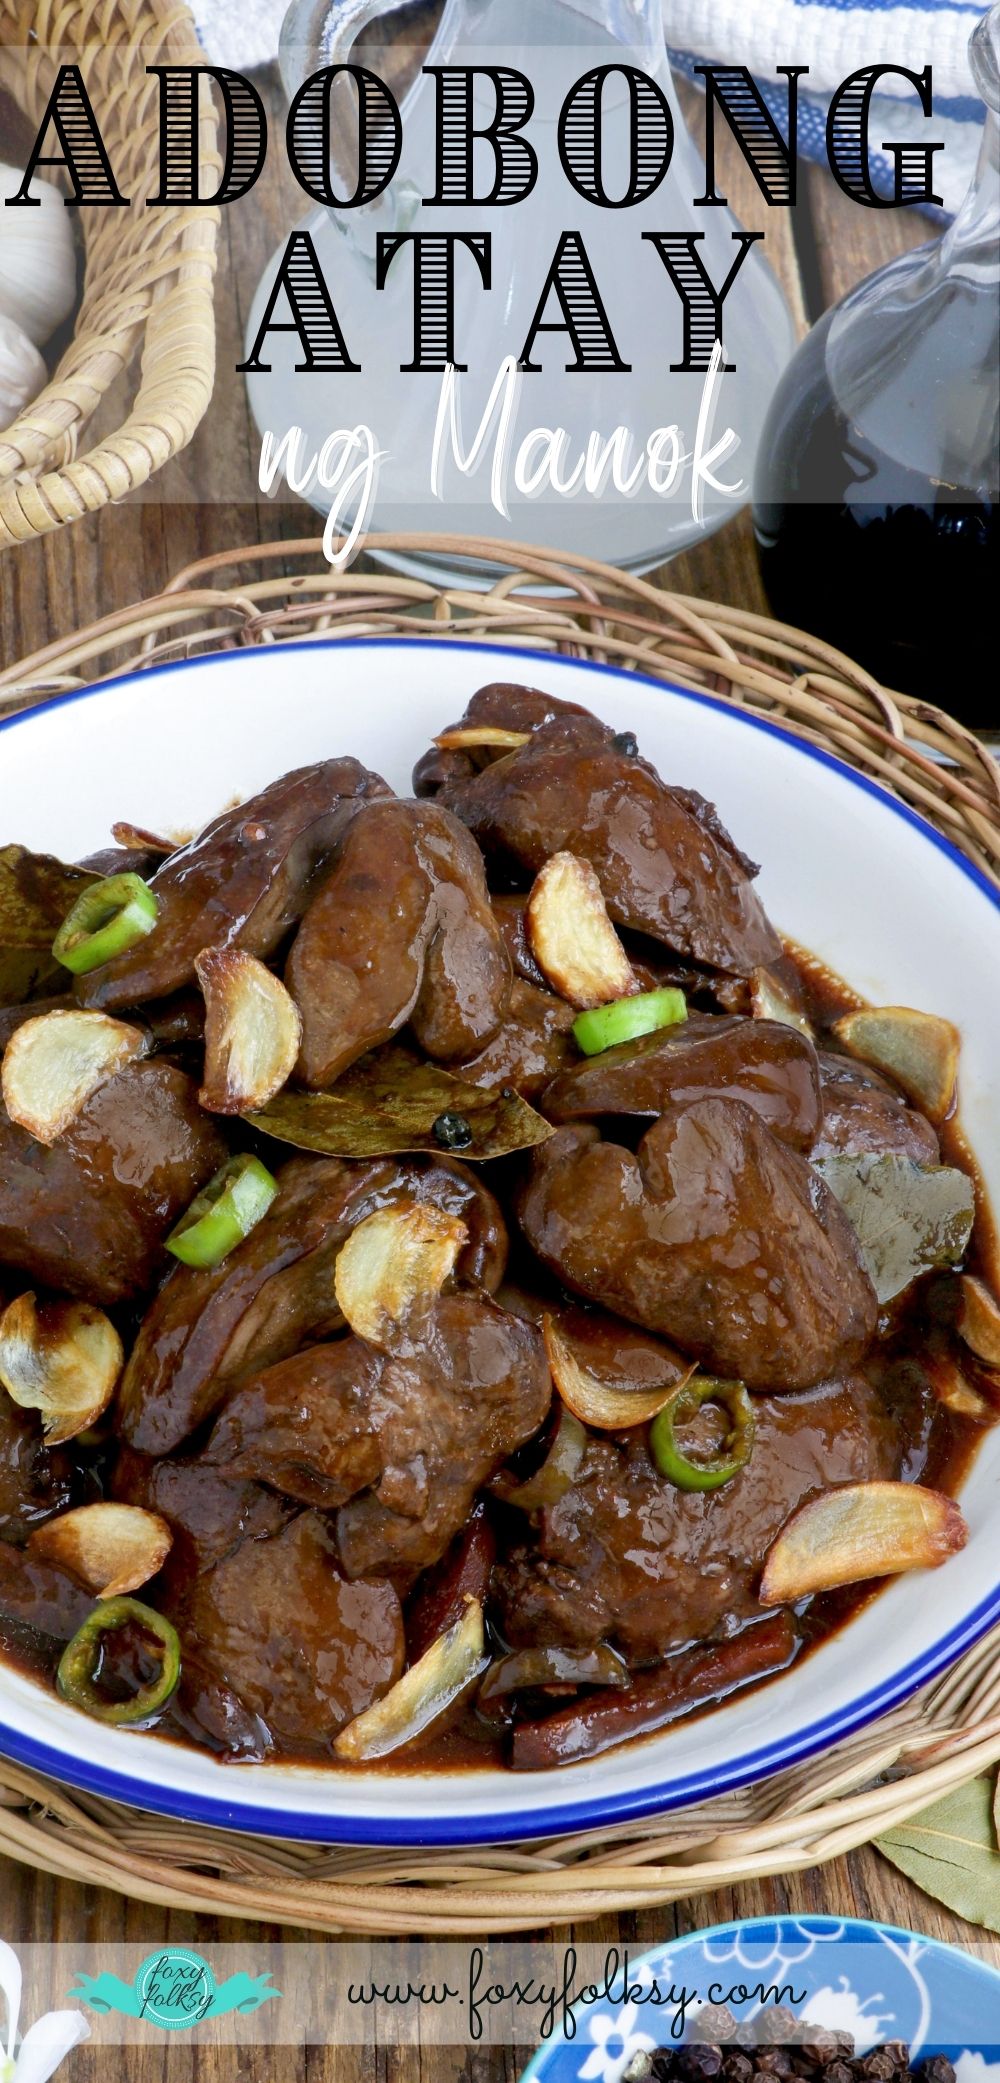 Adobong Atay ng Manok made with seared chicken livers in a savory-tangy sauce.